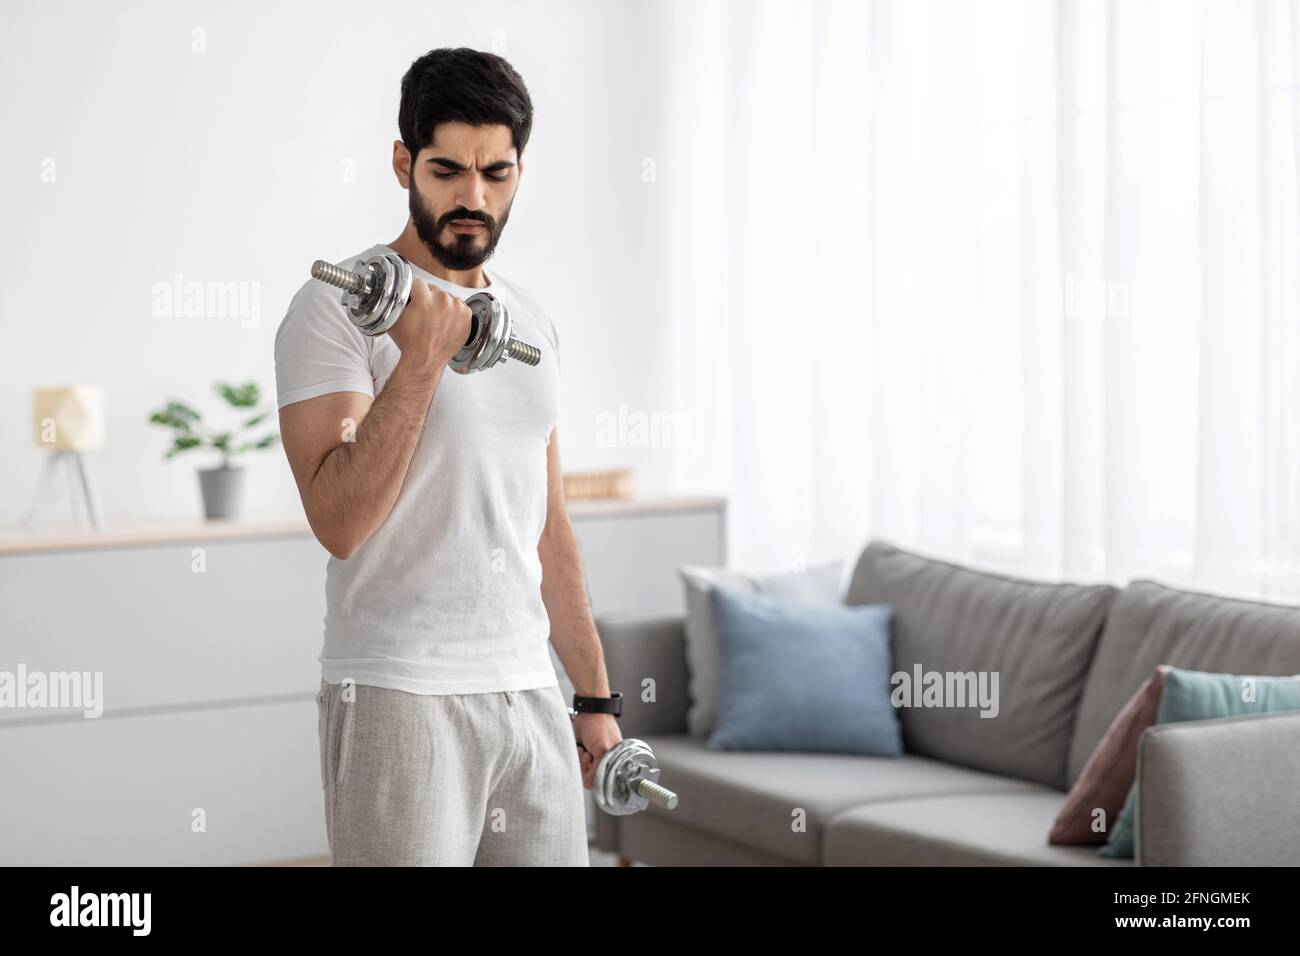 Be safe at home, exercise for muscles, new normal and workout during lockdown Stock Photo